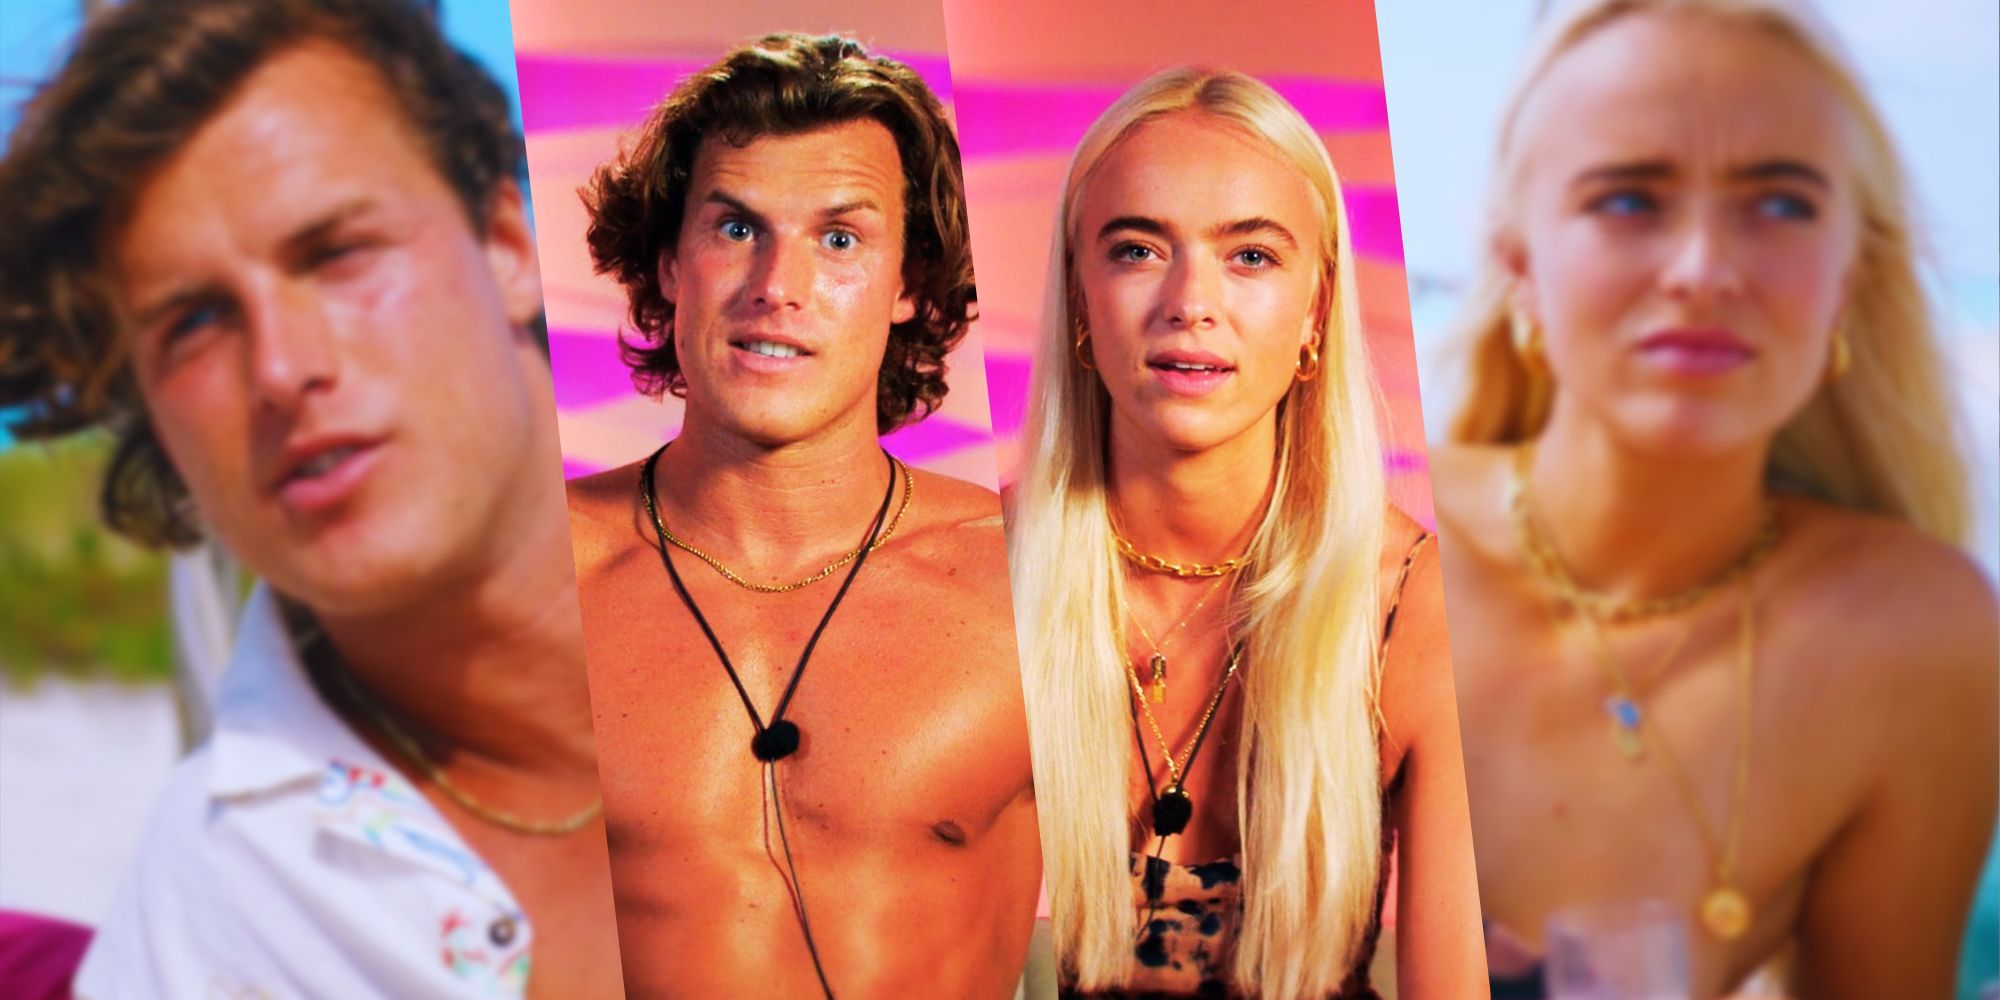 Too Hot to Handle stars reveal plans to move in together - and who